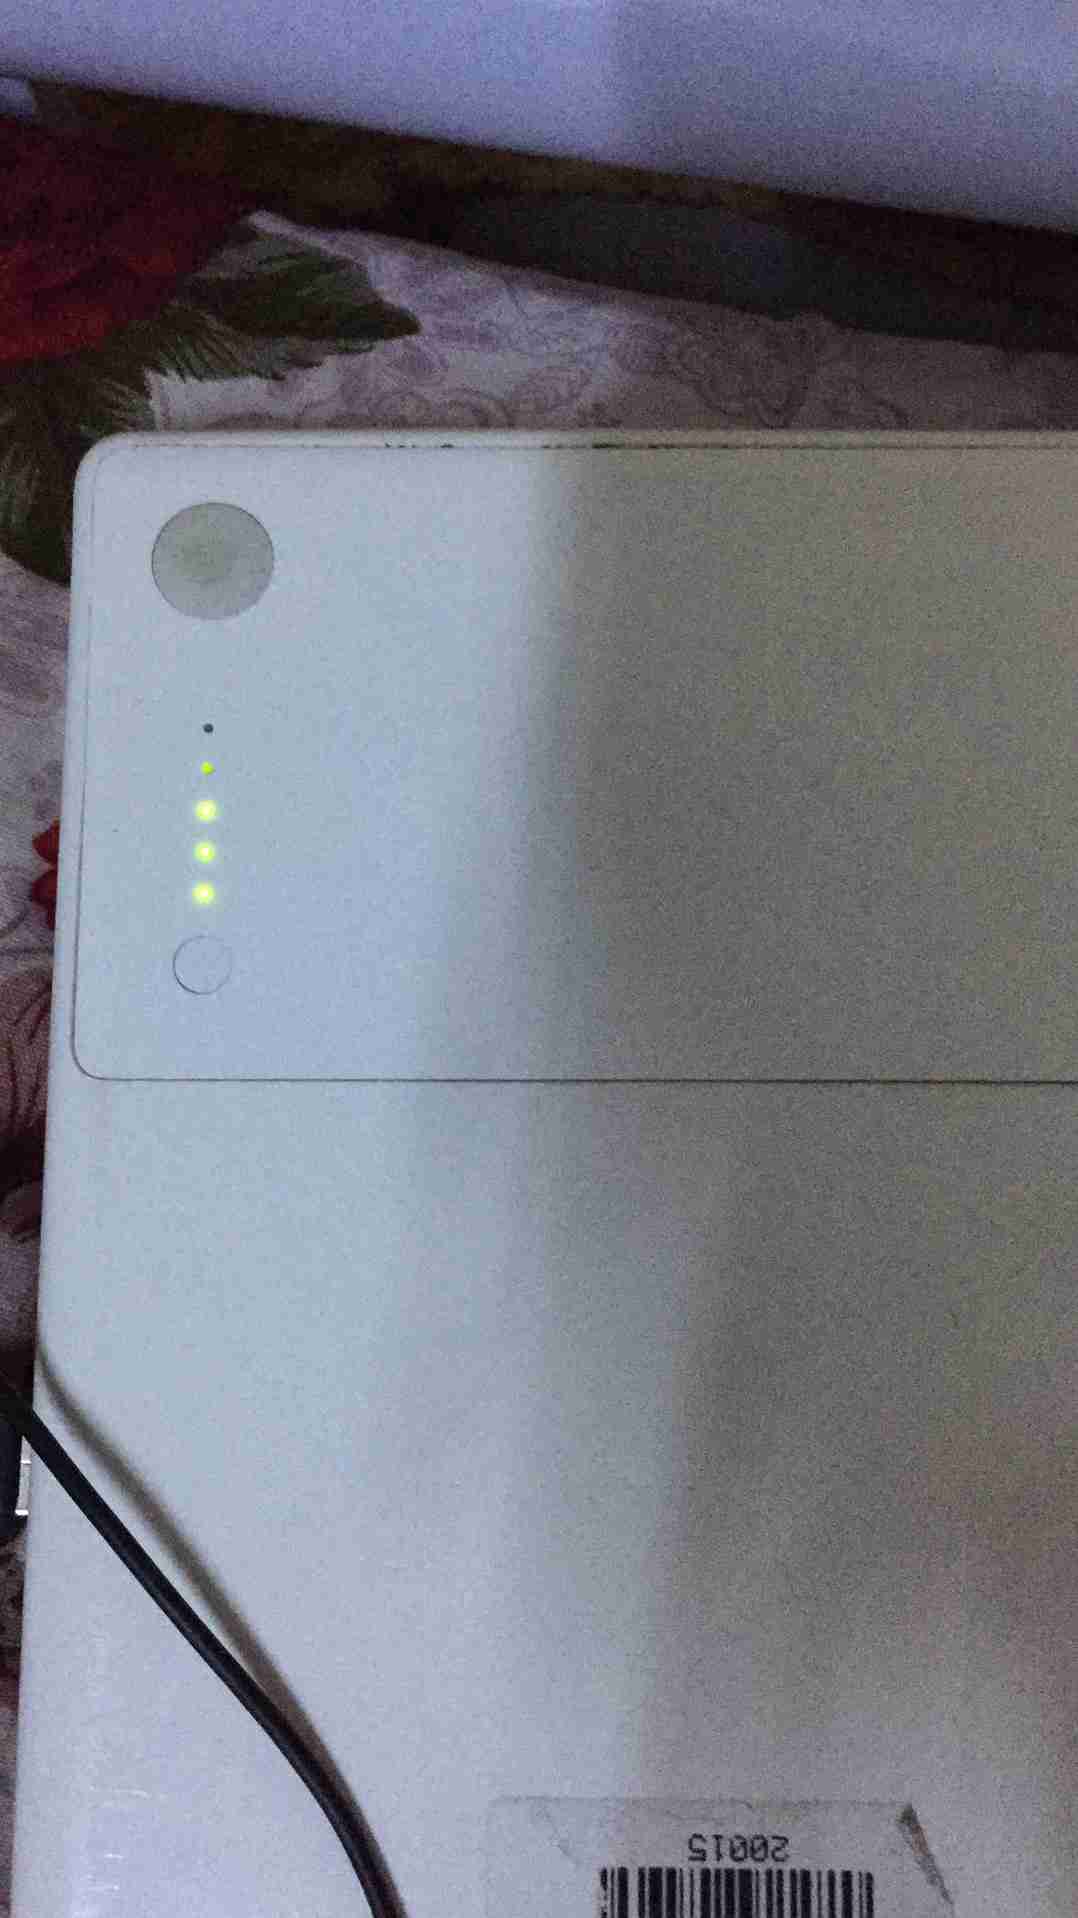 DELL ATG CORE i5 LAPTOP RARLEY USED IN GOOD WORKING CONDITION-  لاب توب ماك بوك 800 ريال...